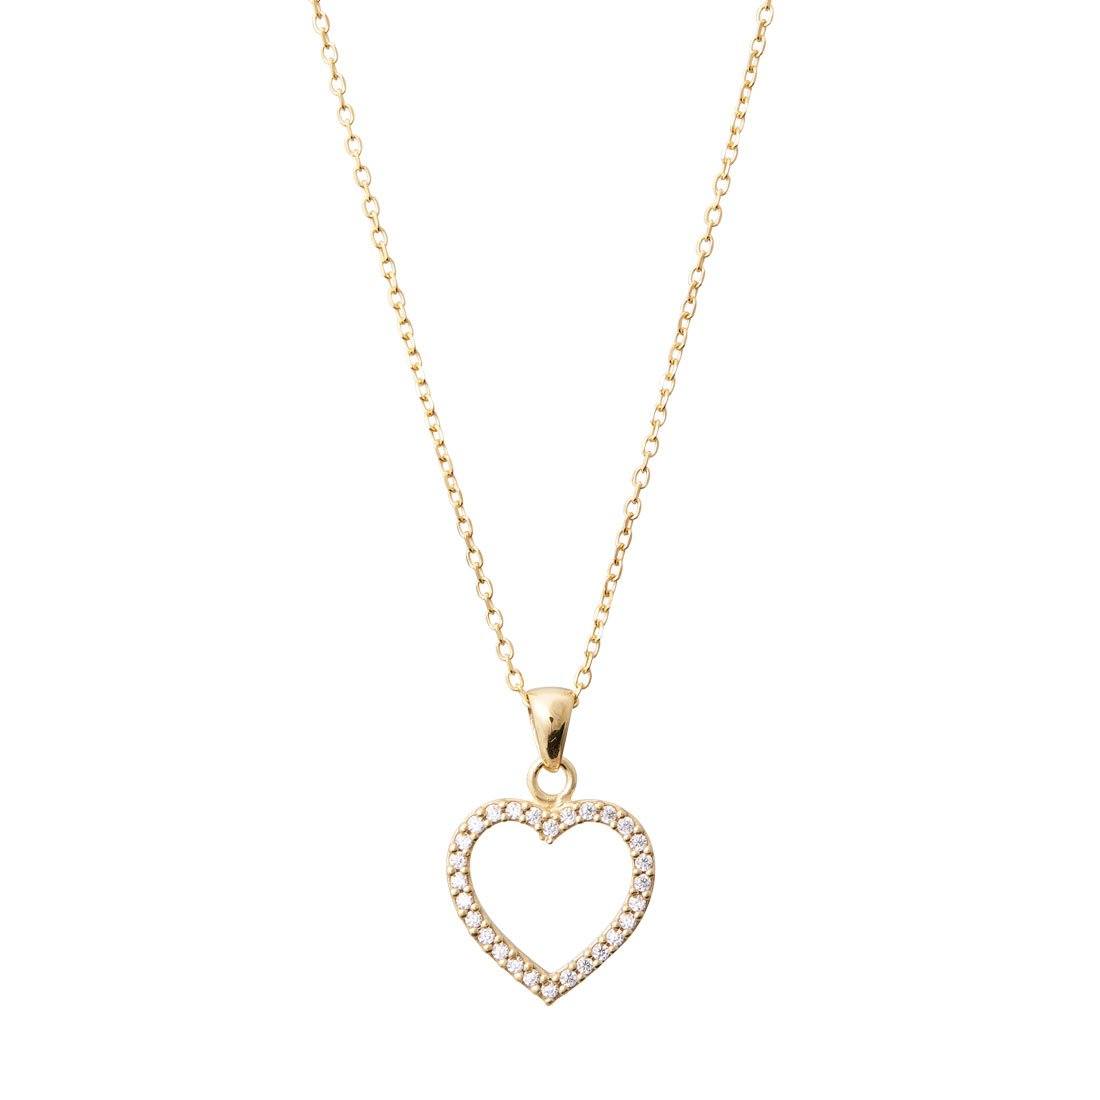 Cubic Zirconia Open Heart Necklace in 9ct Yellow Gold Silver Infused Necklaces Bevilles 